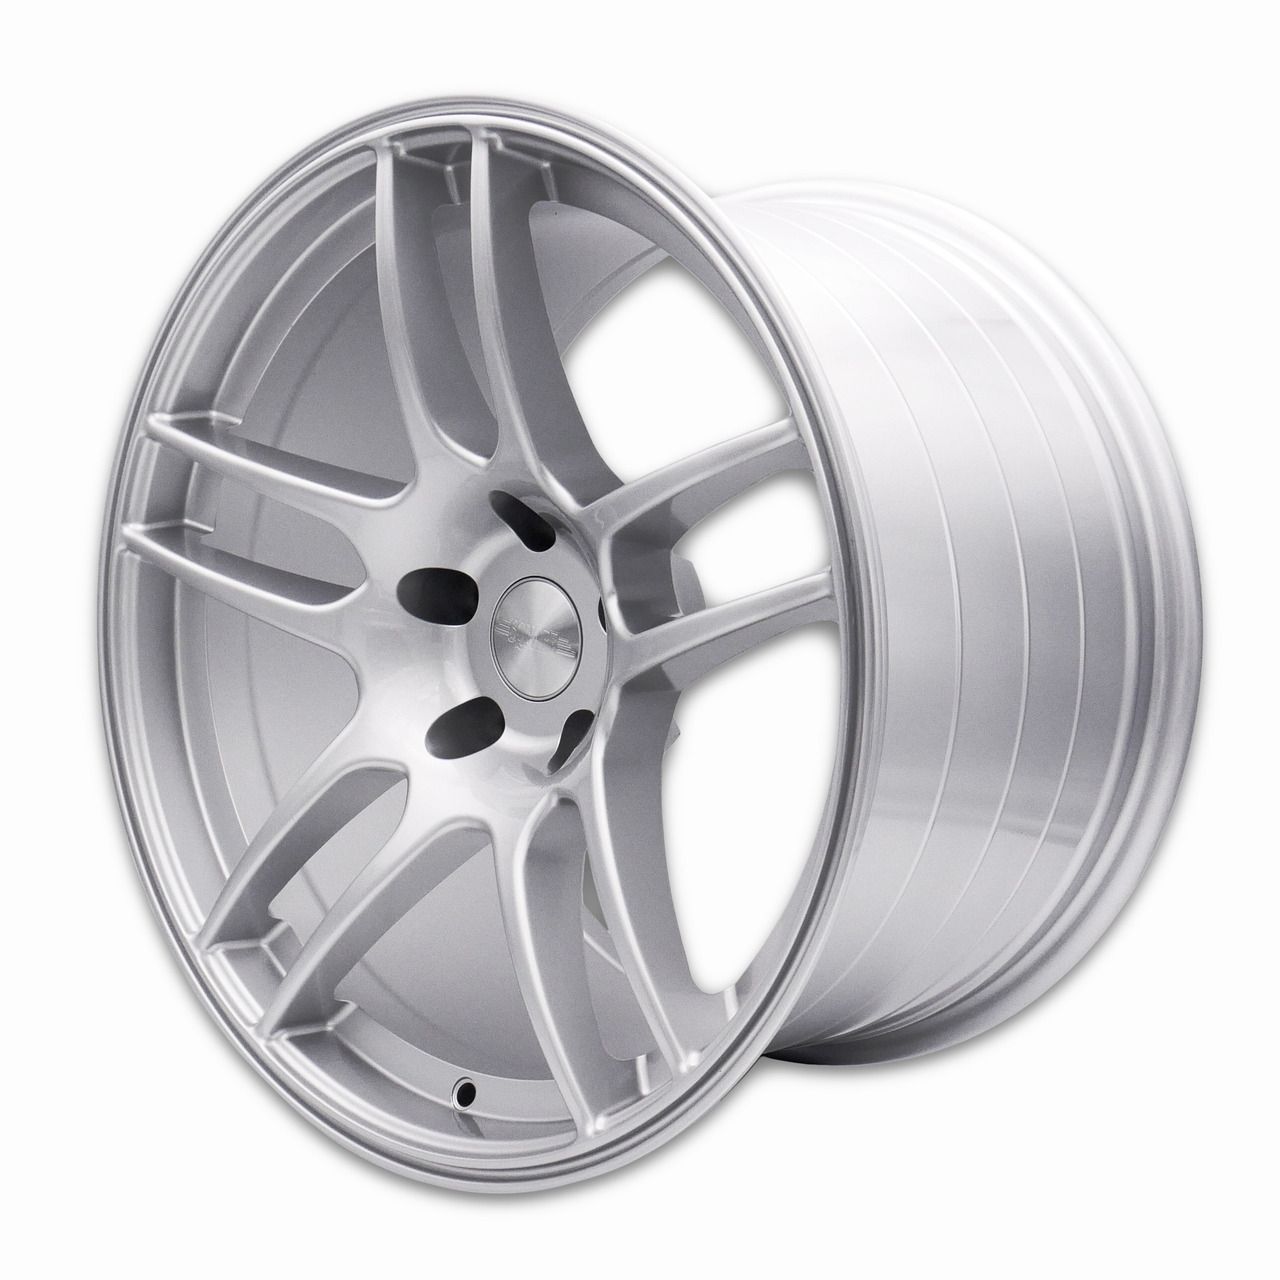 SQUARE Wheels - Flow Formed G33 R Model - 18x9.5 +12 5x114.3 - Silver